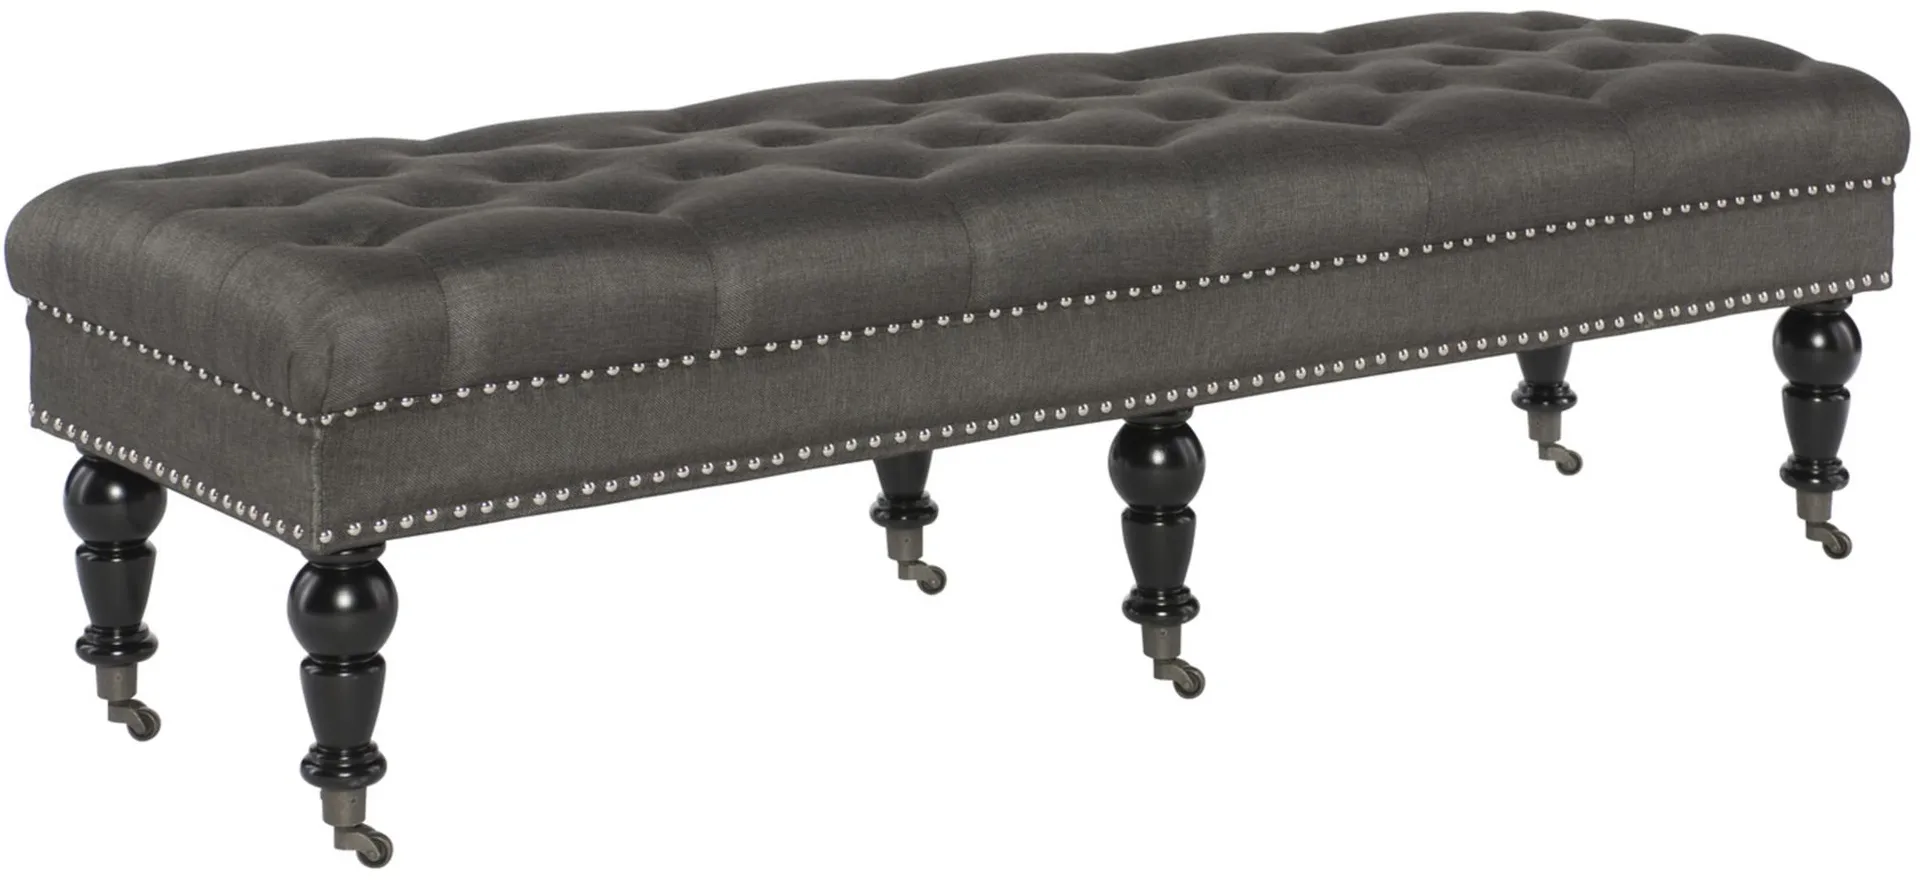 Isabelle Bench in Black/Charcoal by Linon Home Decor